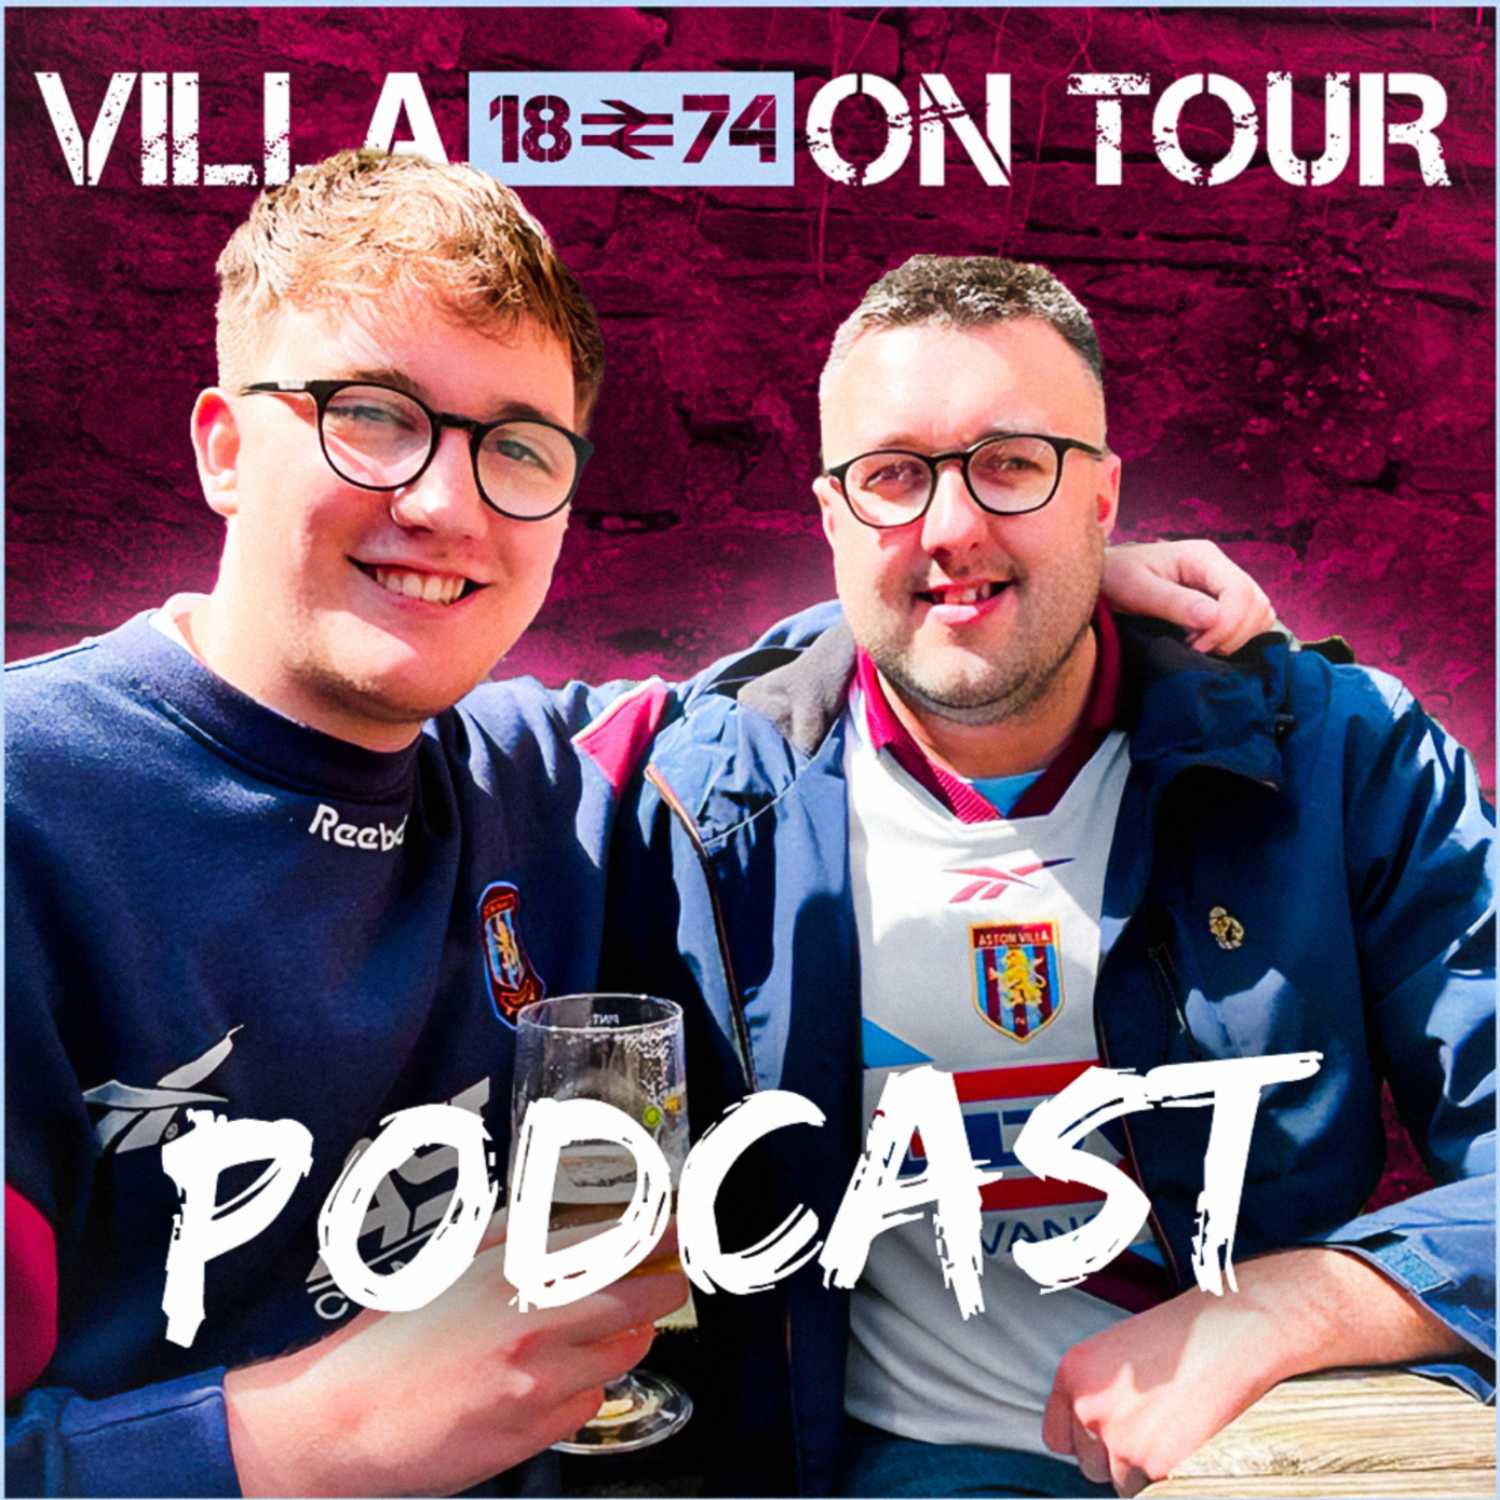 Our experience following Villa in Mostar and coming from behind to win again at Brentford